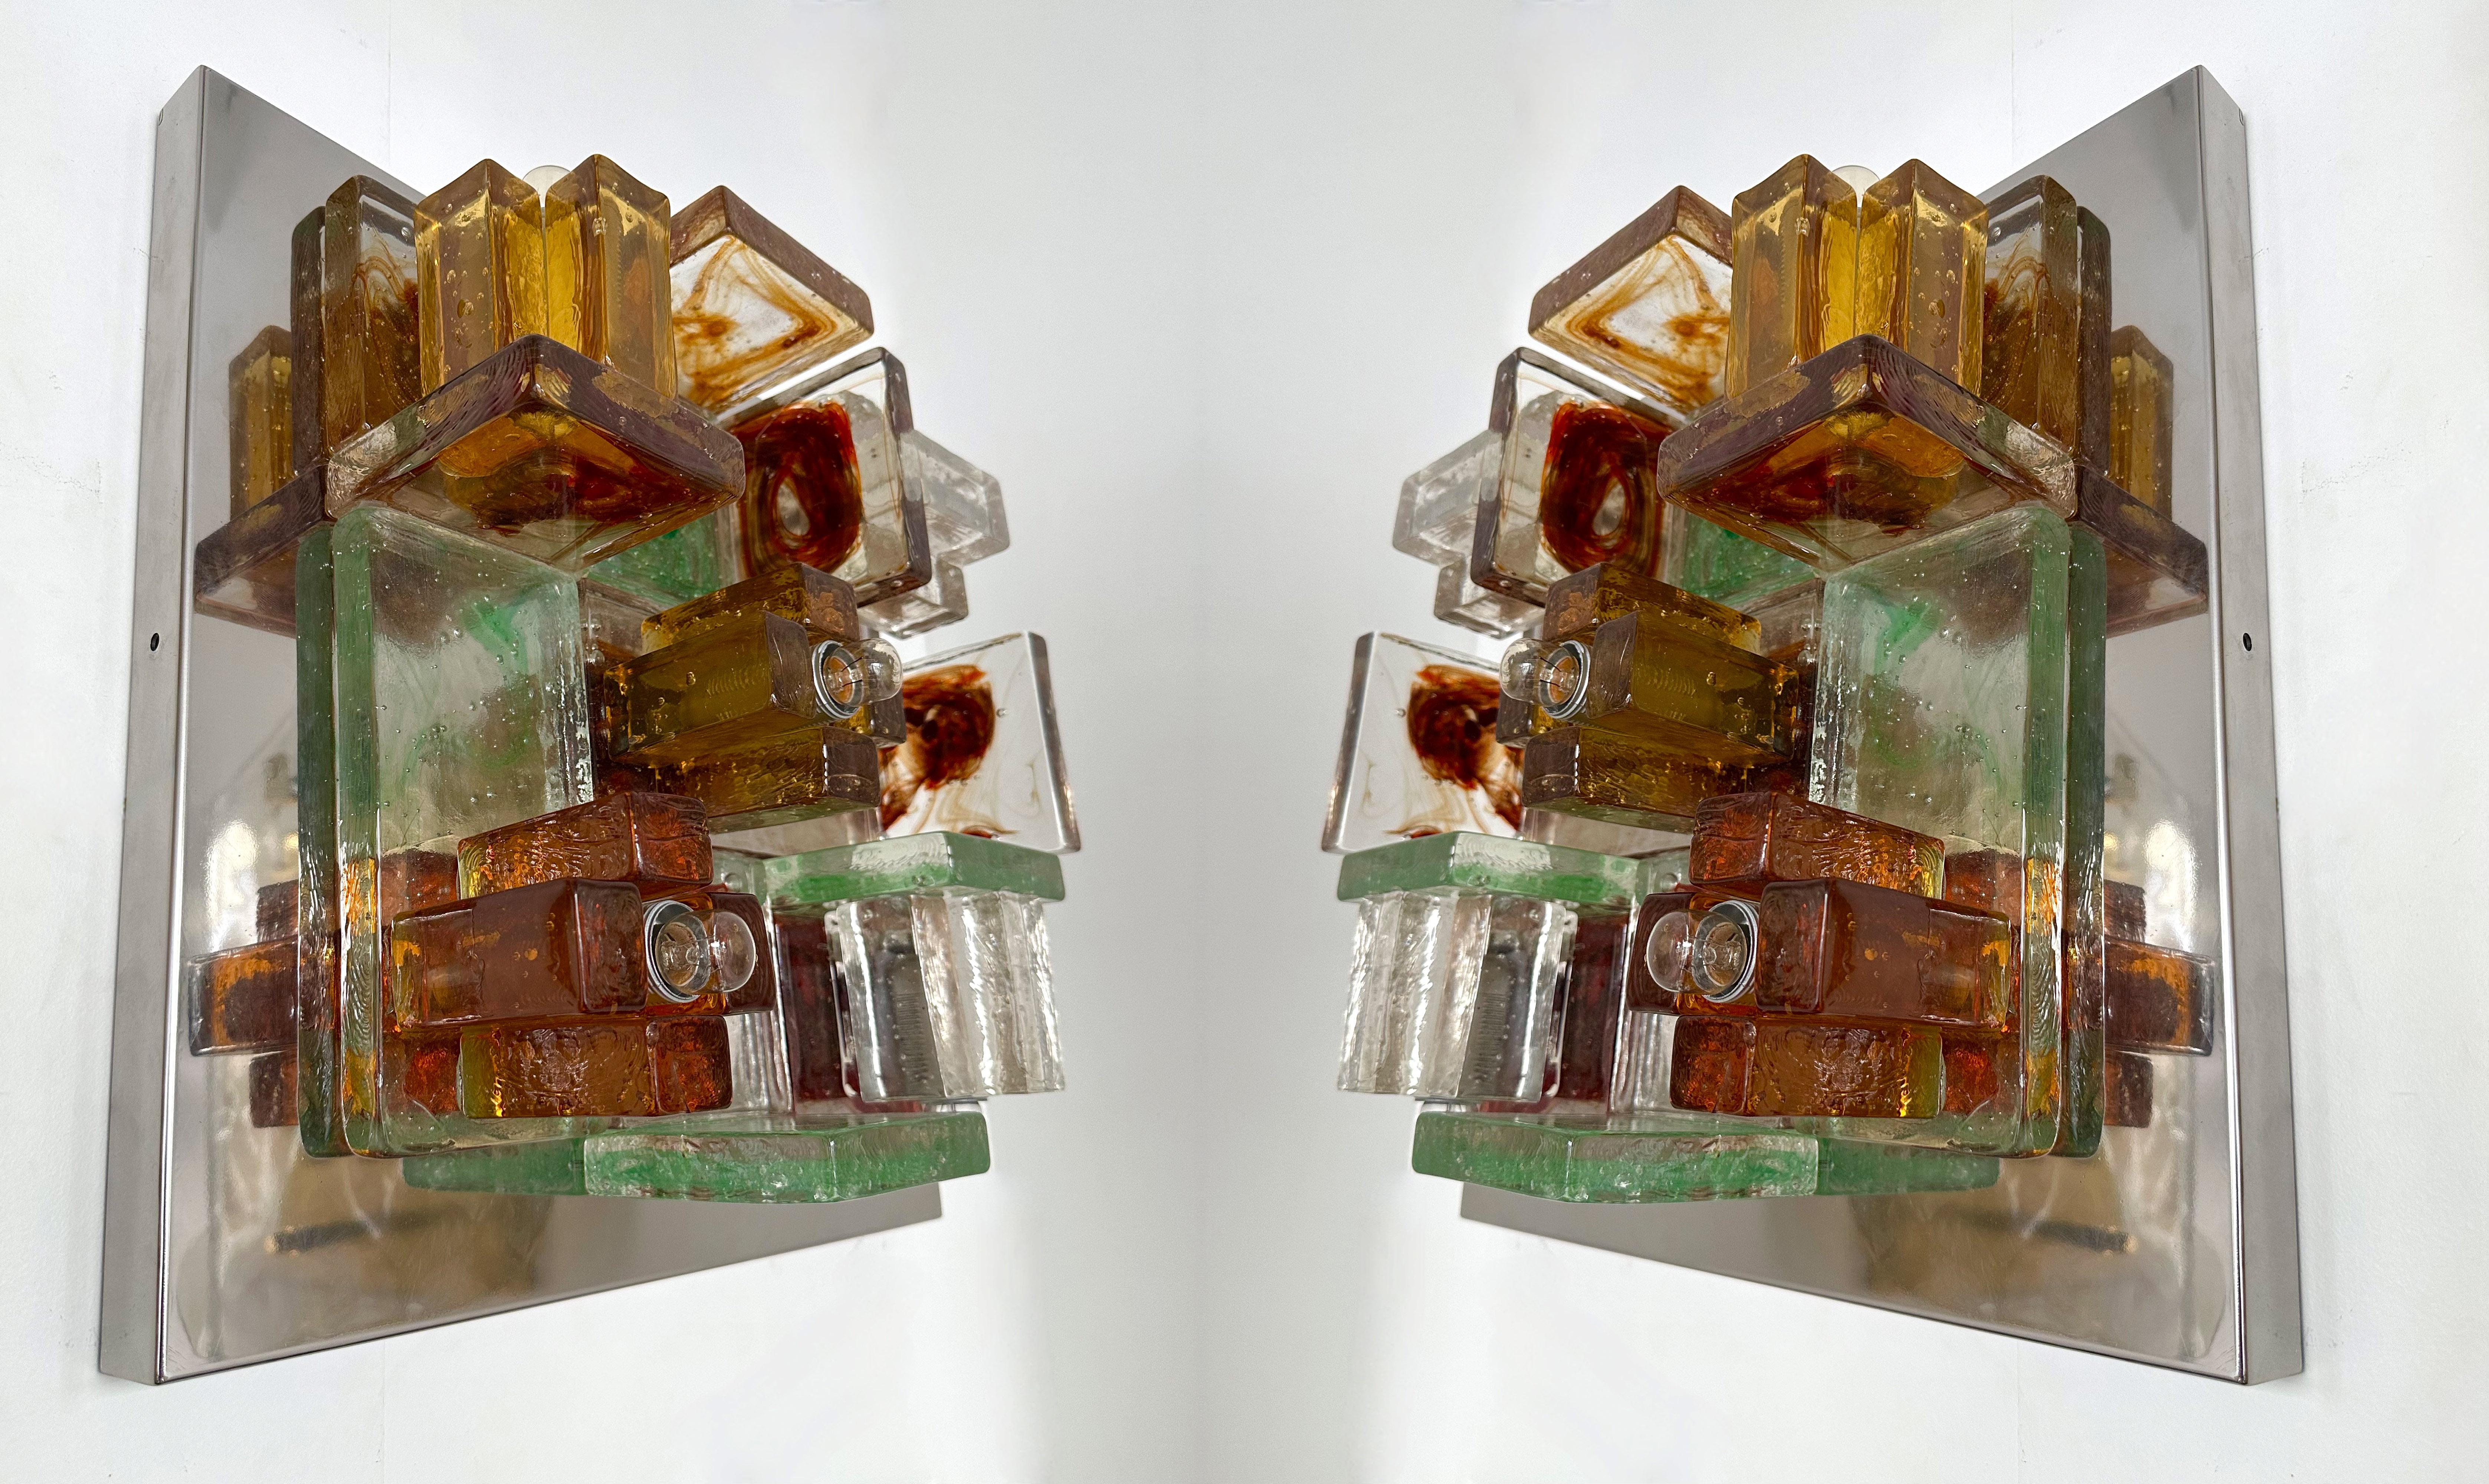 Pair of Geometry Glass Construction Metal Sconces by Poliarte, Italy, 1970s For Sale 3